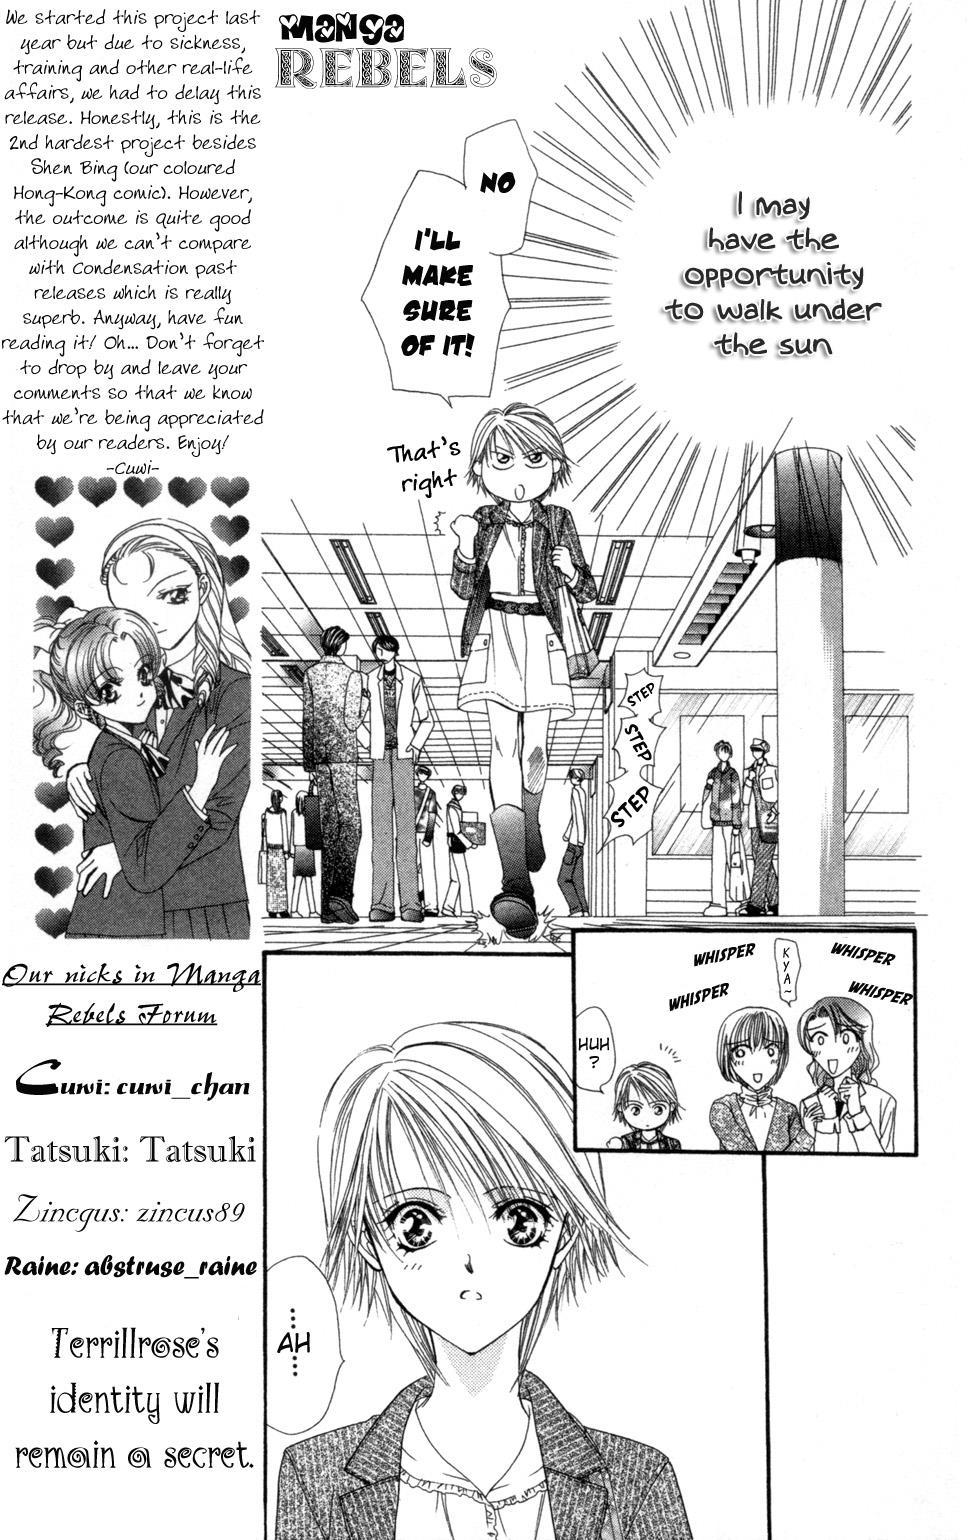 Skip Beat!, Chapter 24 The Other Side of Impact image 09